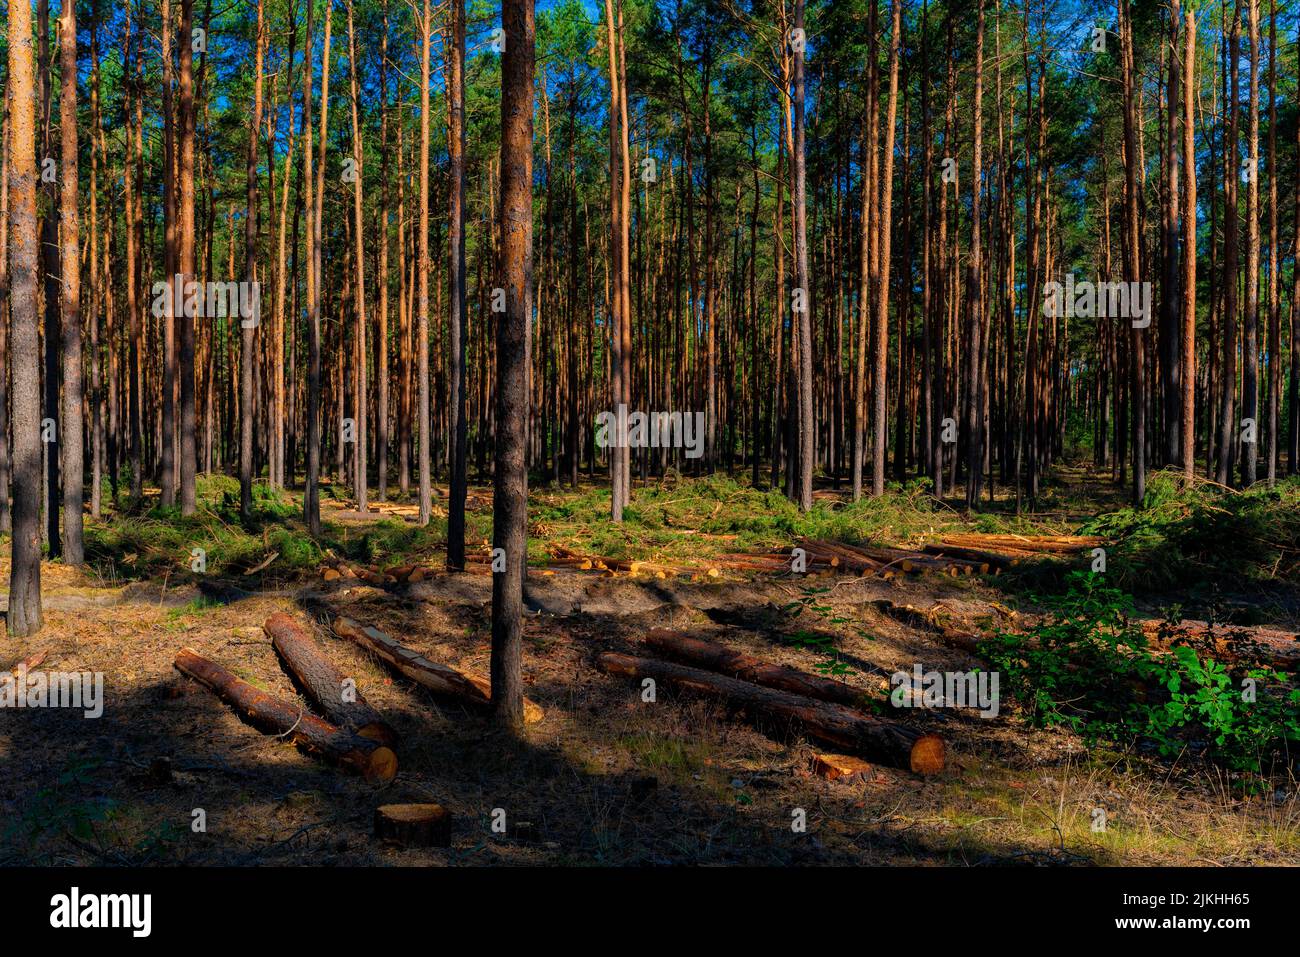 Pine forest after industrial tree felling, felled tree trunks lie on the forest floor Stock Photo